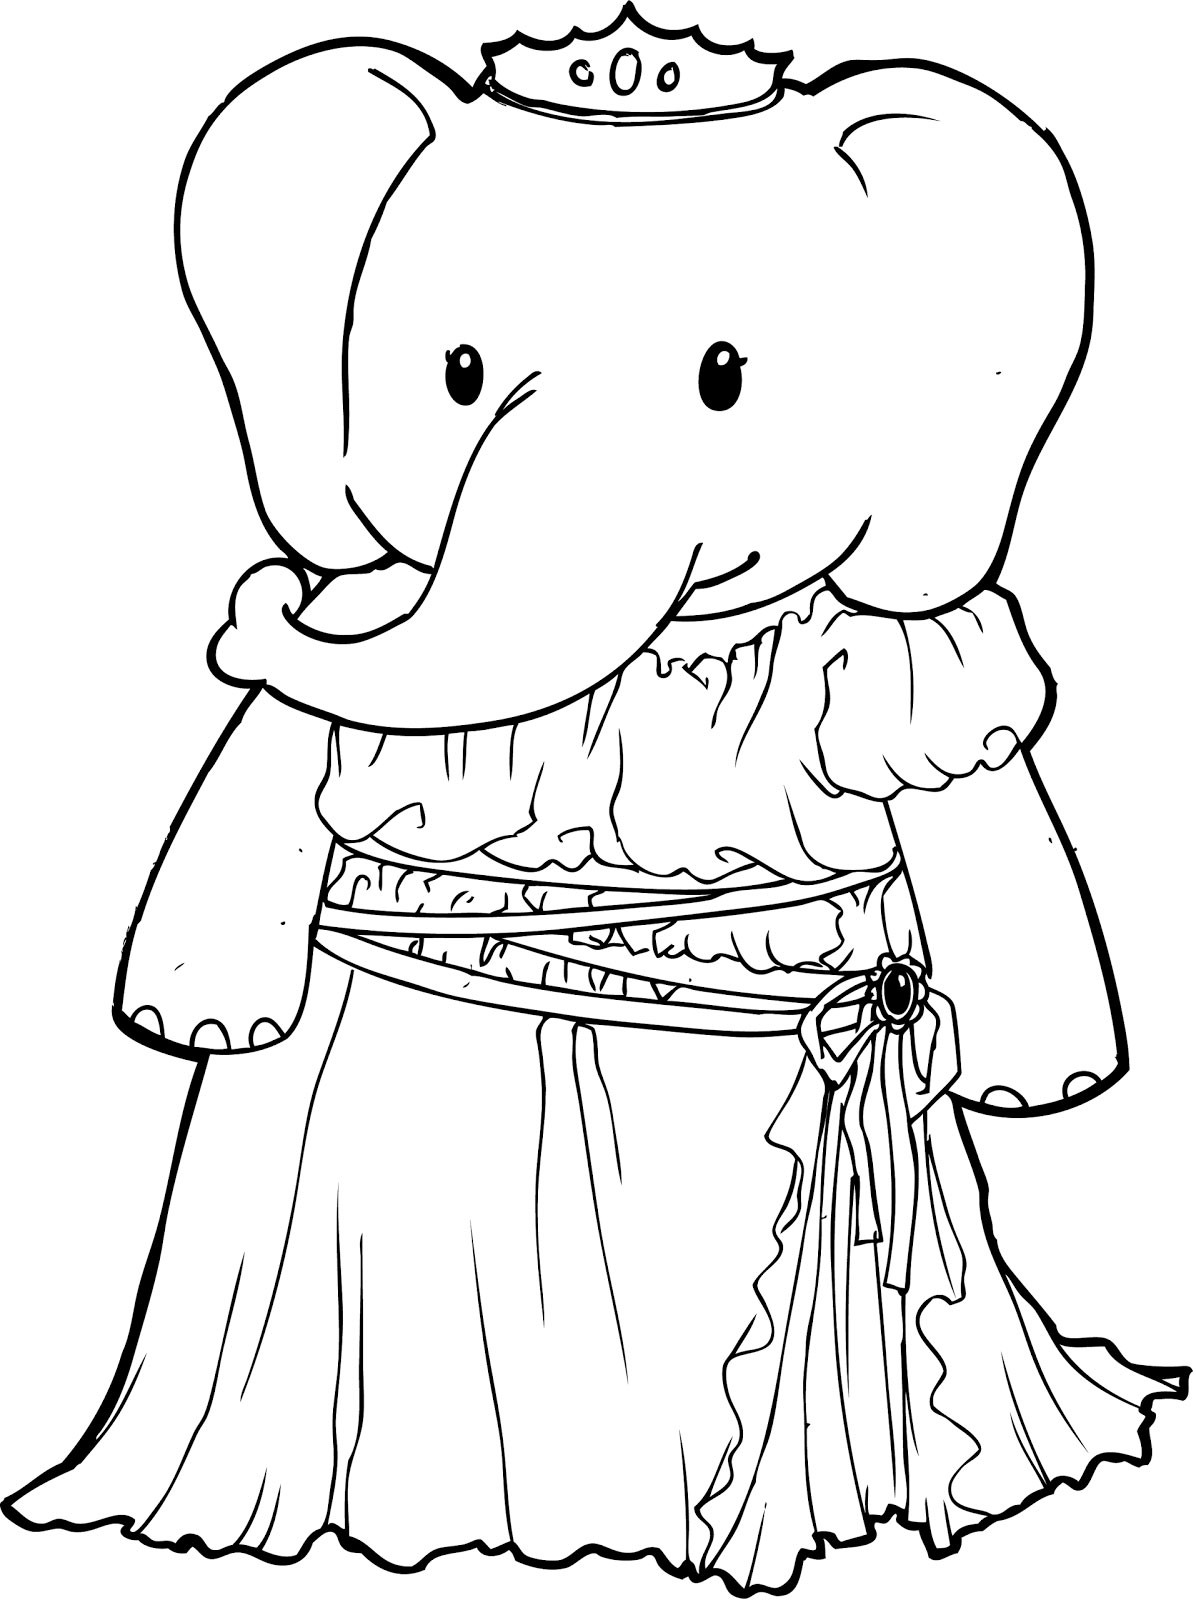 Elephant Coloring Pages For Kids
 Amazing Elephant Coloring Pages